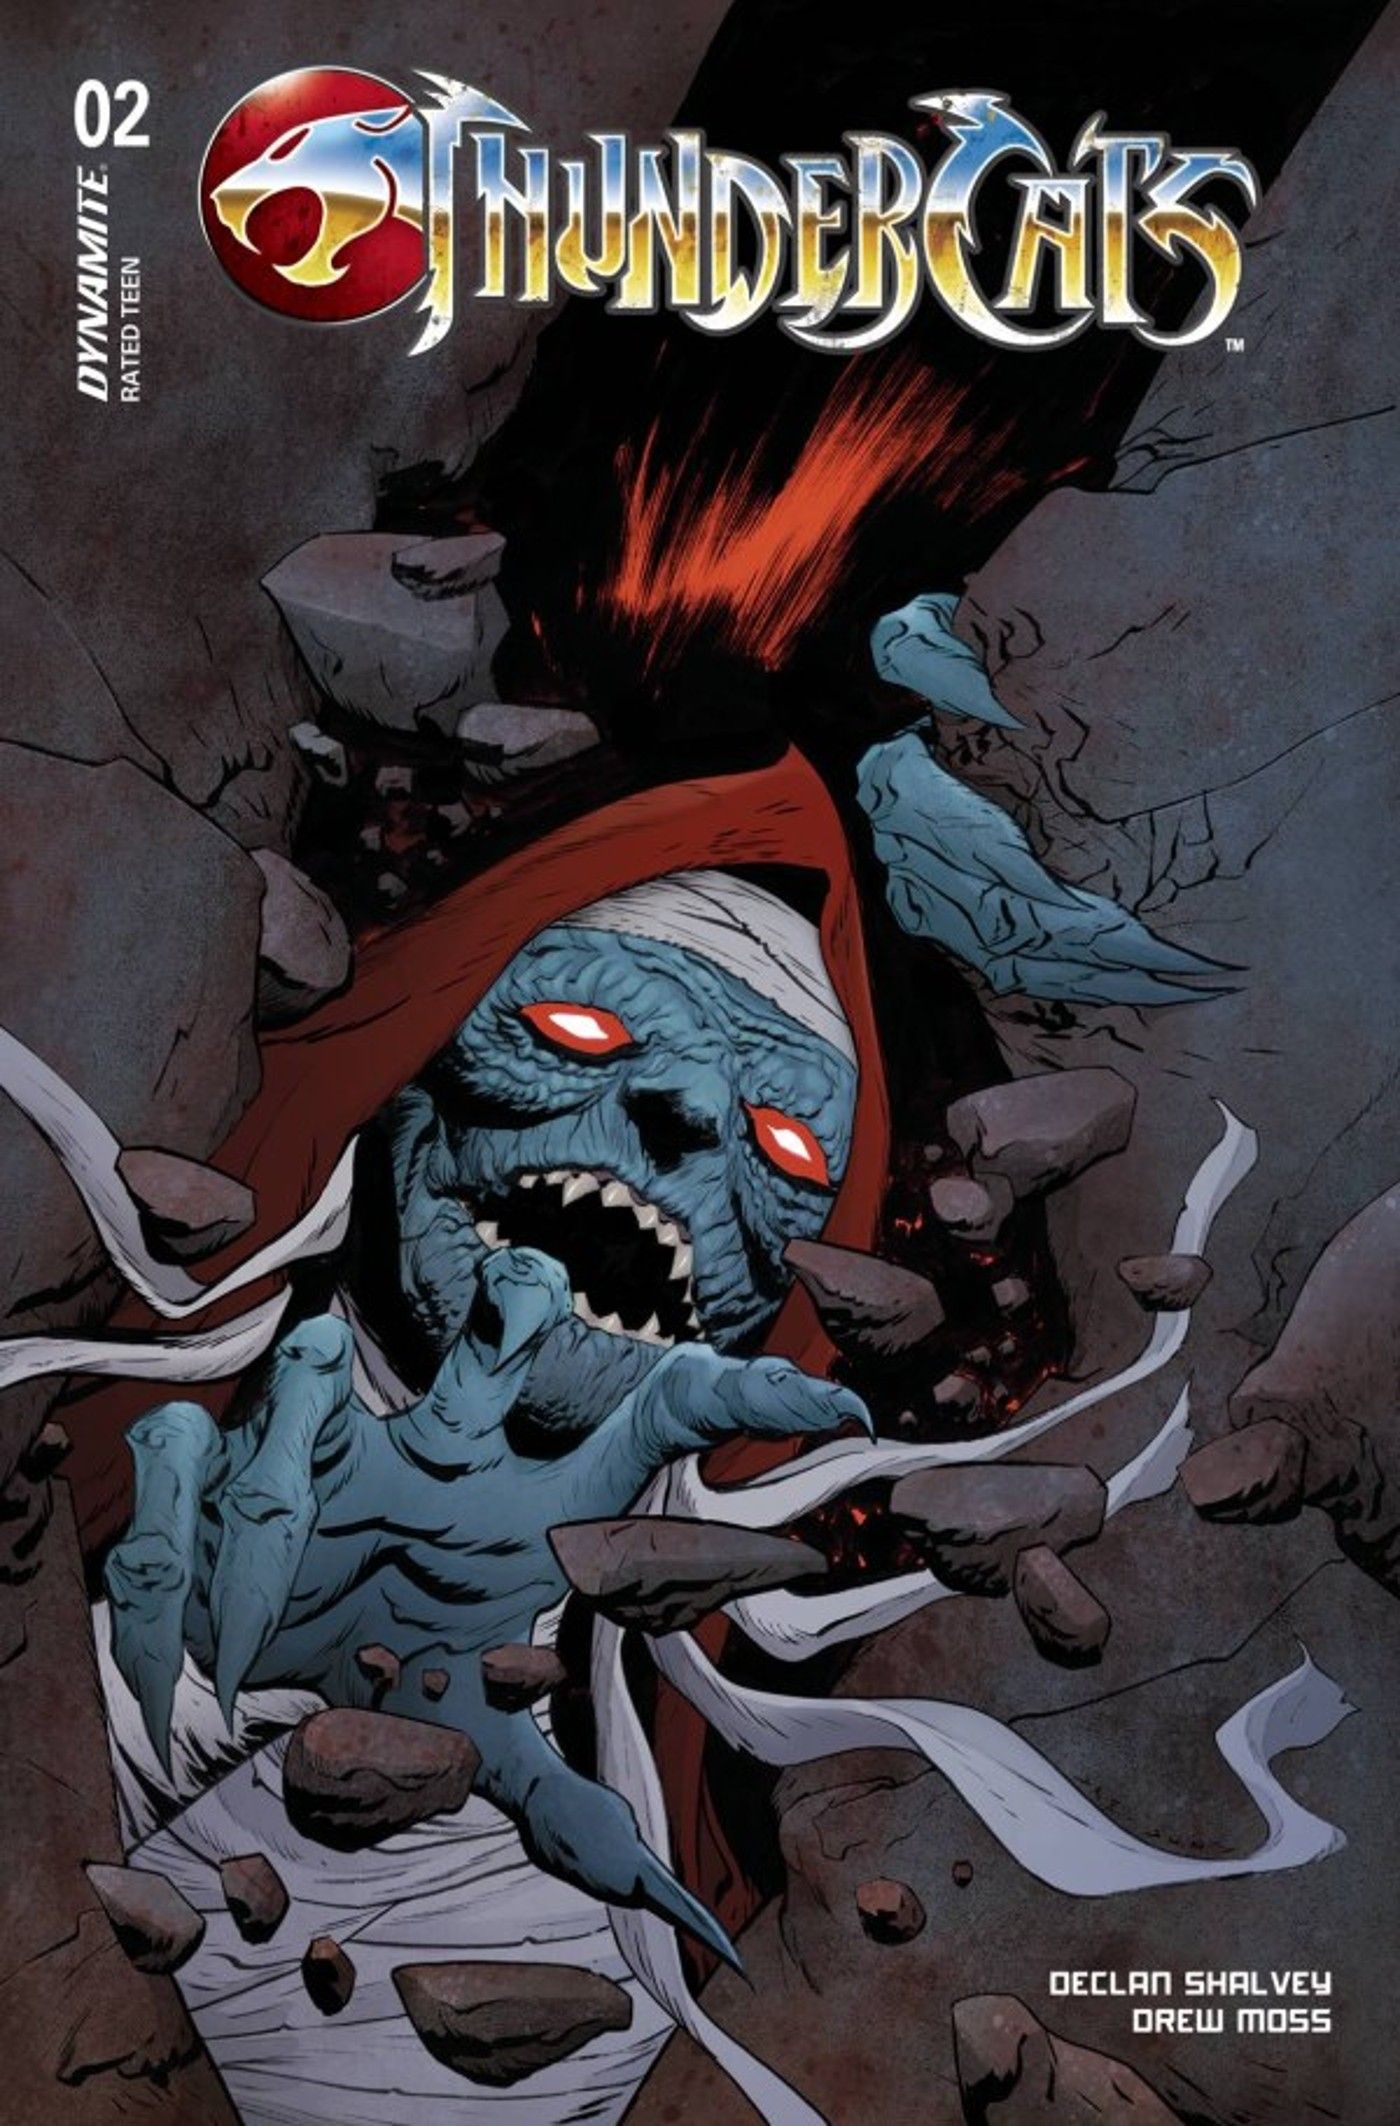 Image of Mumm-Ra, in his mummy form, breaking out of his crypt.